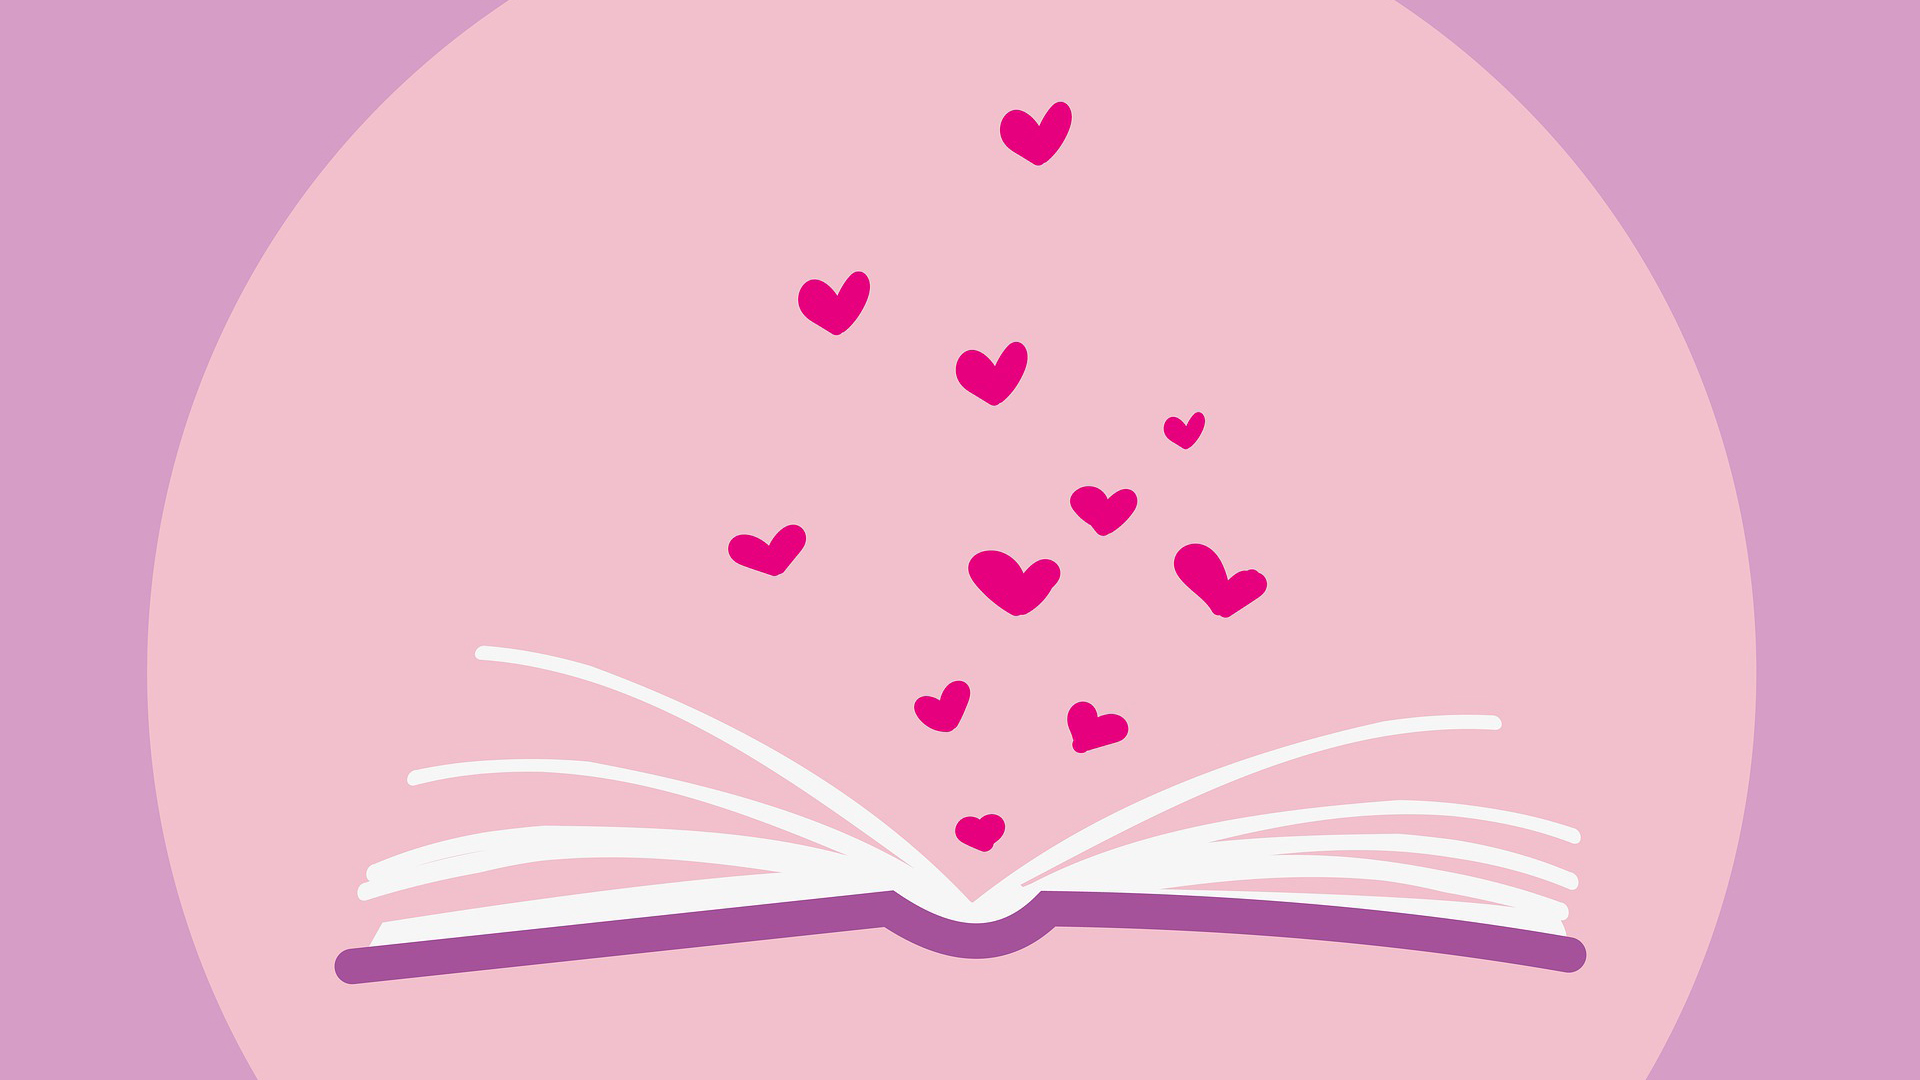 An illustration of pink hearts rising from the pages of a book